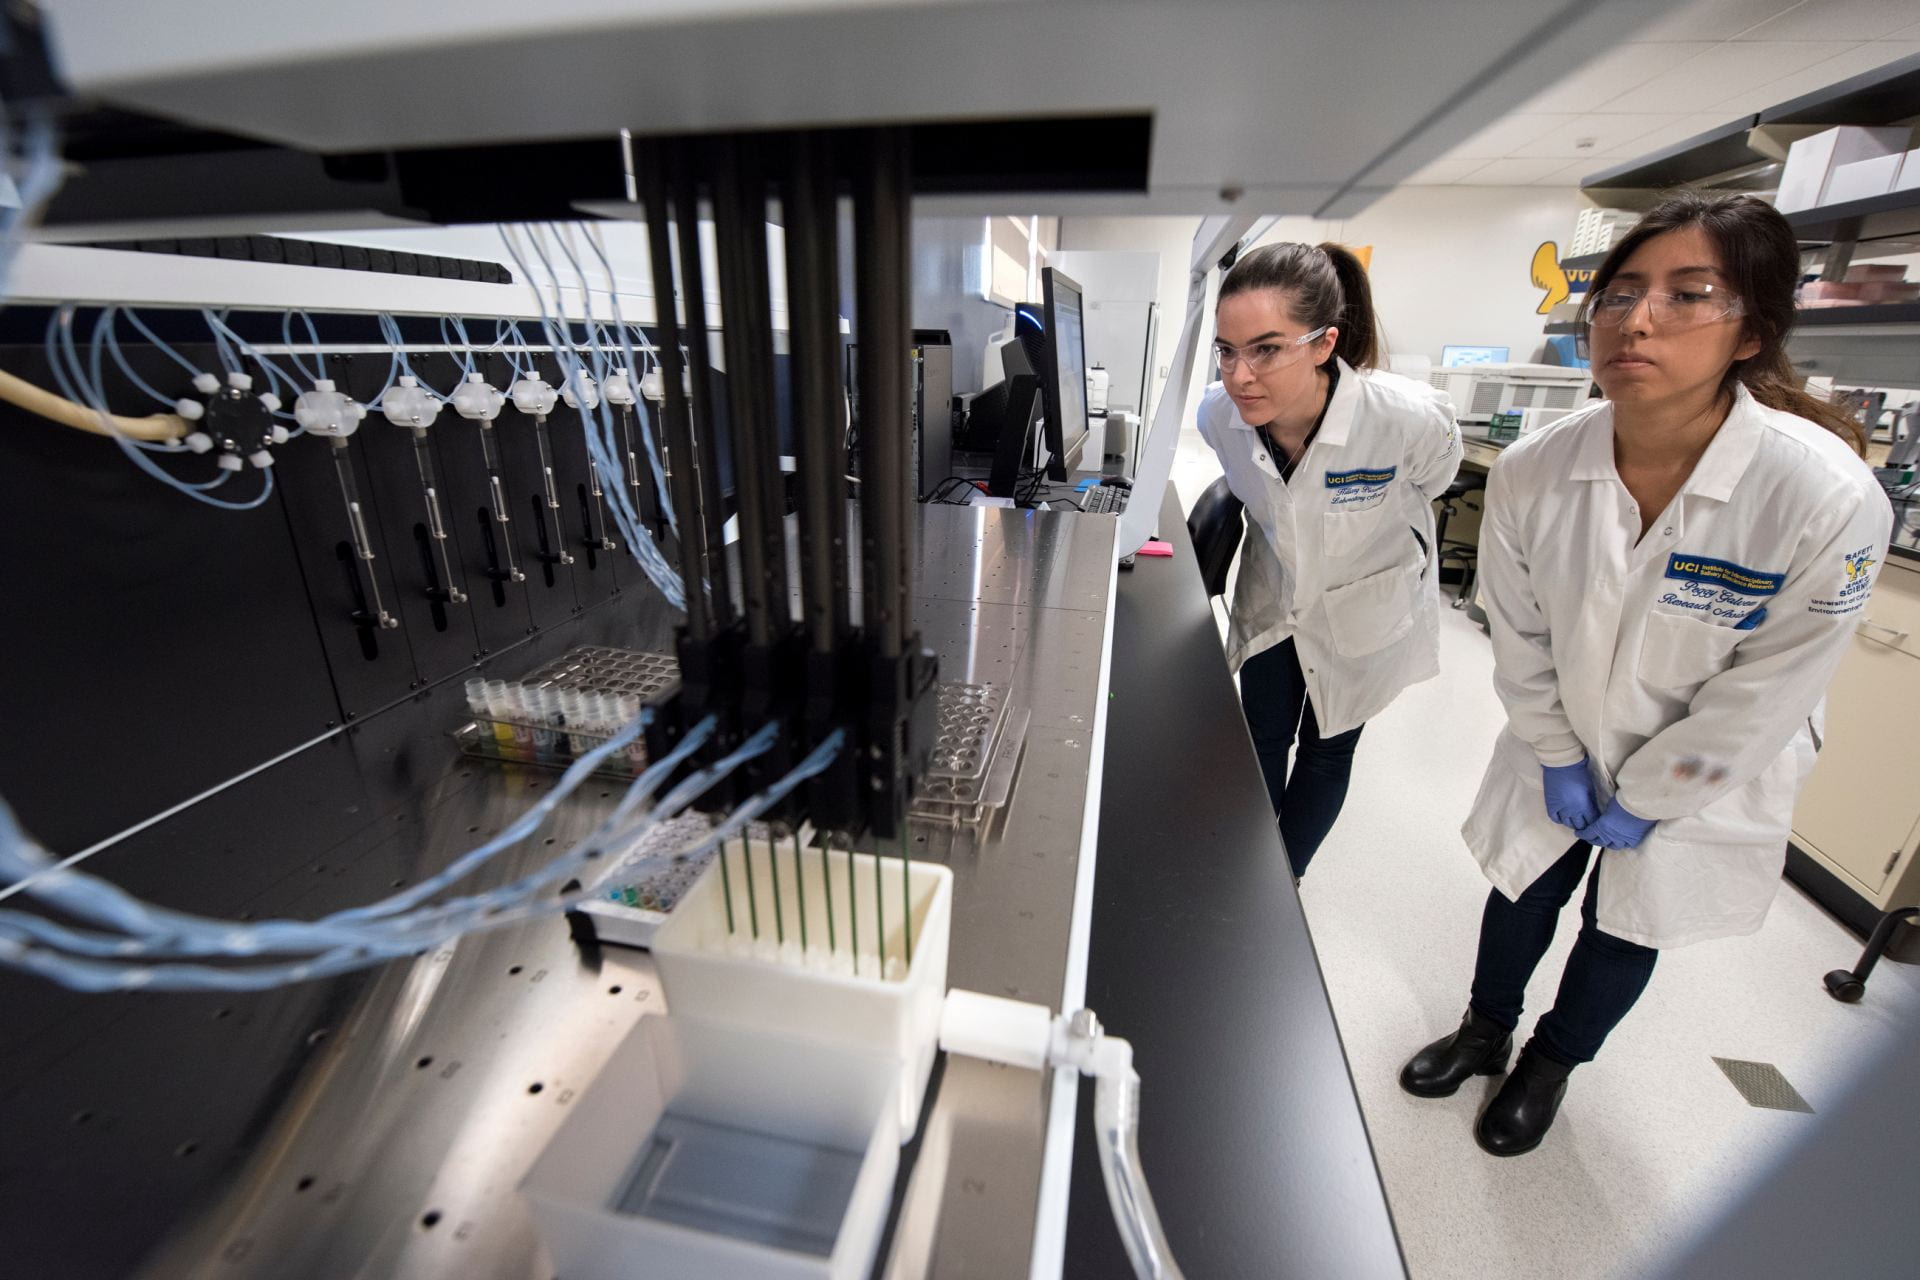 Institute for Interdisciplinary Salivary Bioscience Research laboratory manager Hillary Piccerillo (left) and former lab technician Peggy Galvez oversee the robotic transfer of saliva from collection tubes to test plates for an experiment.